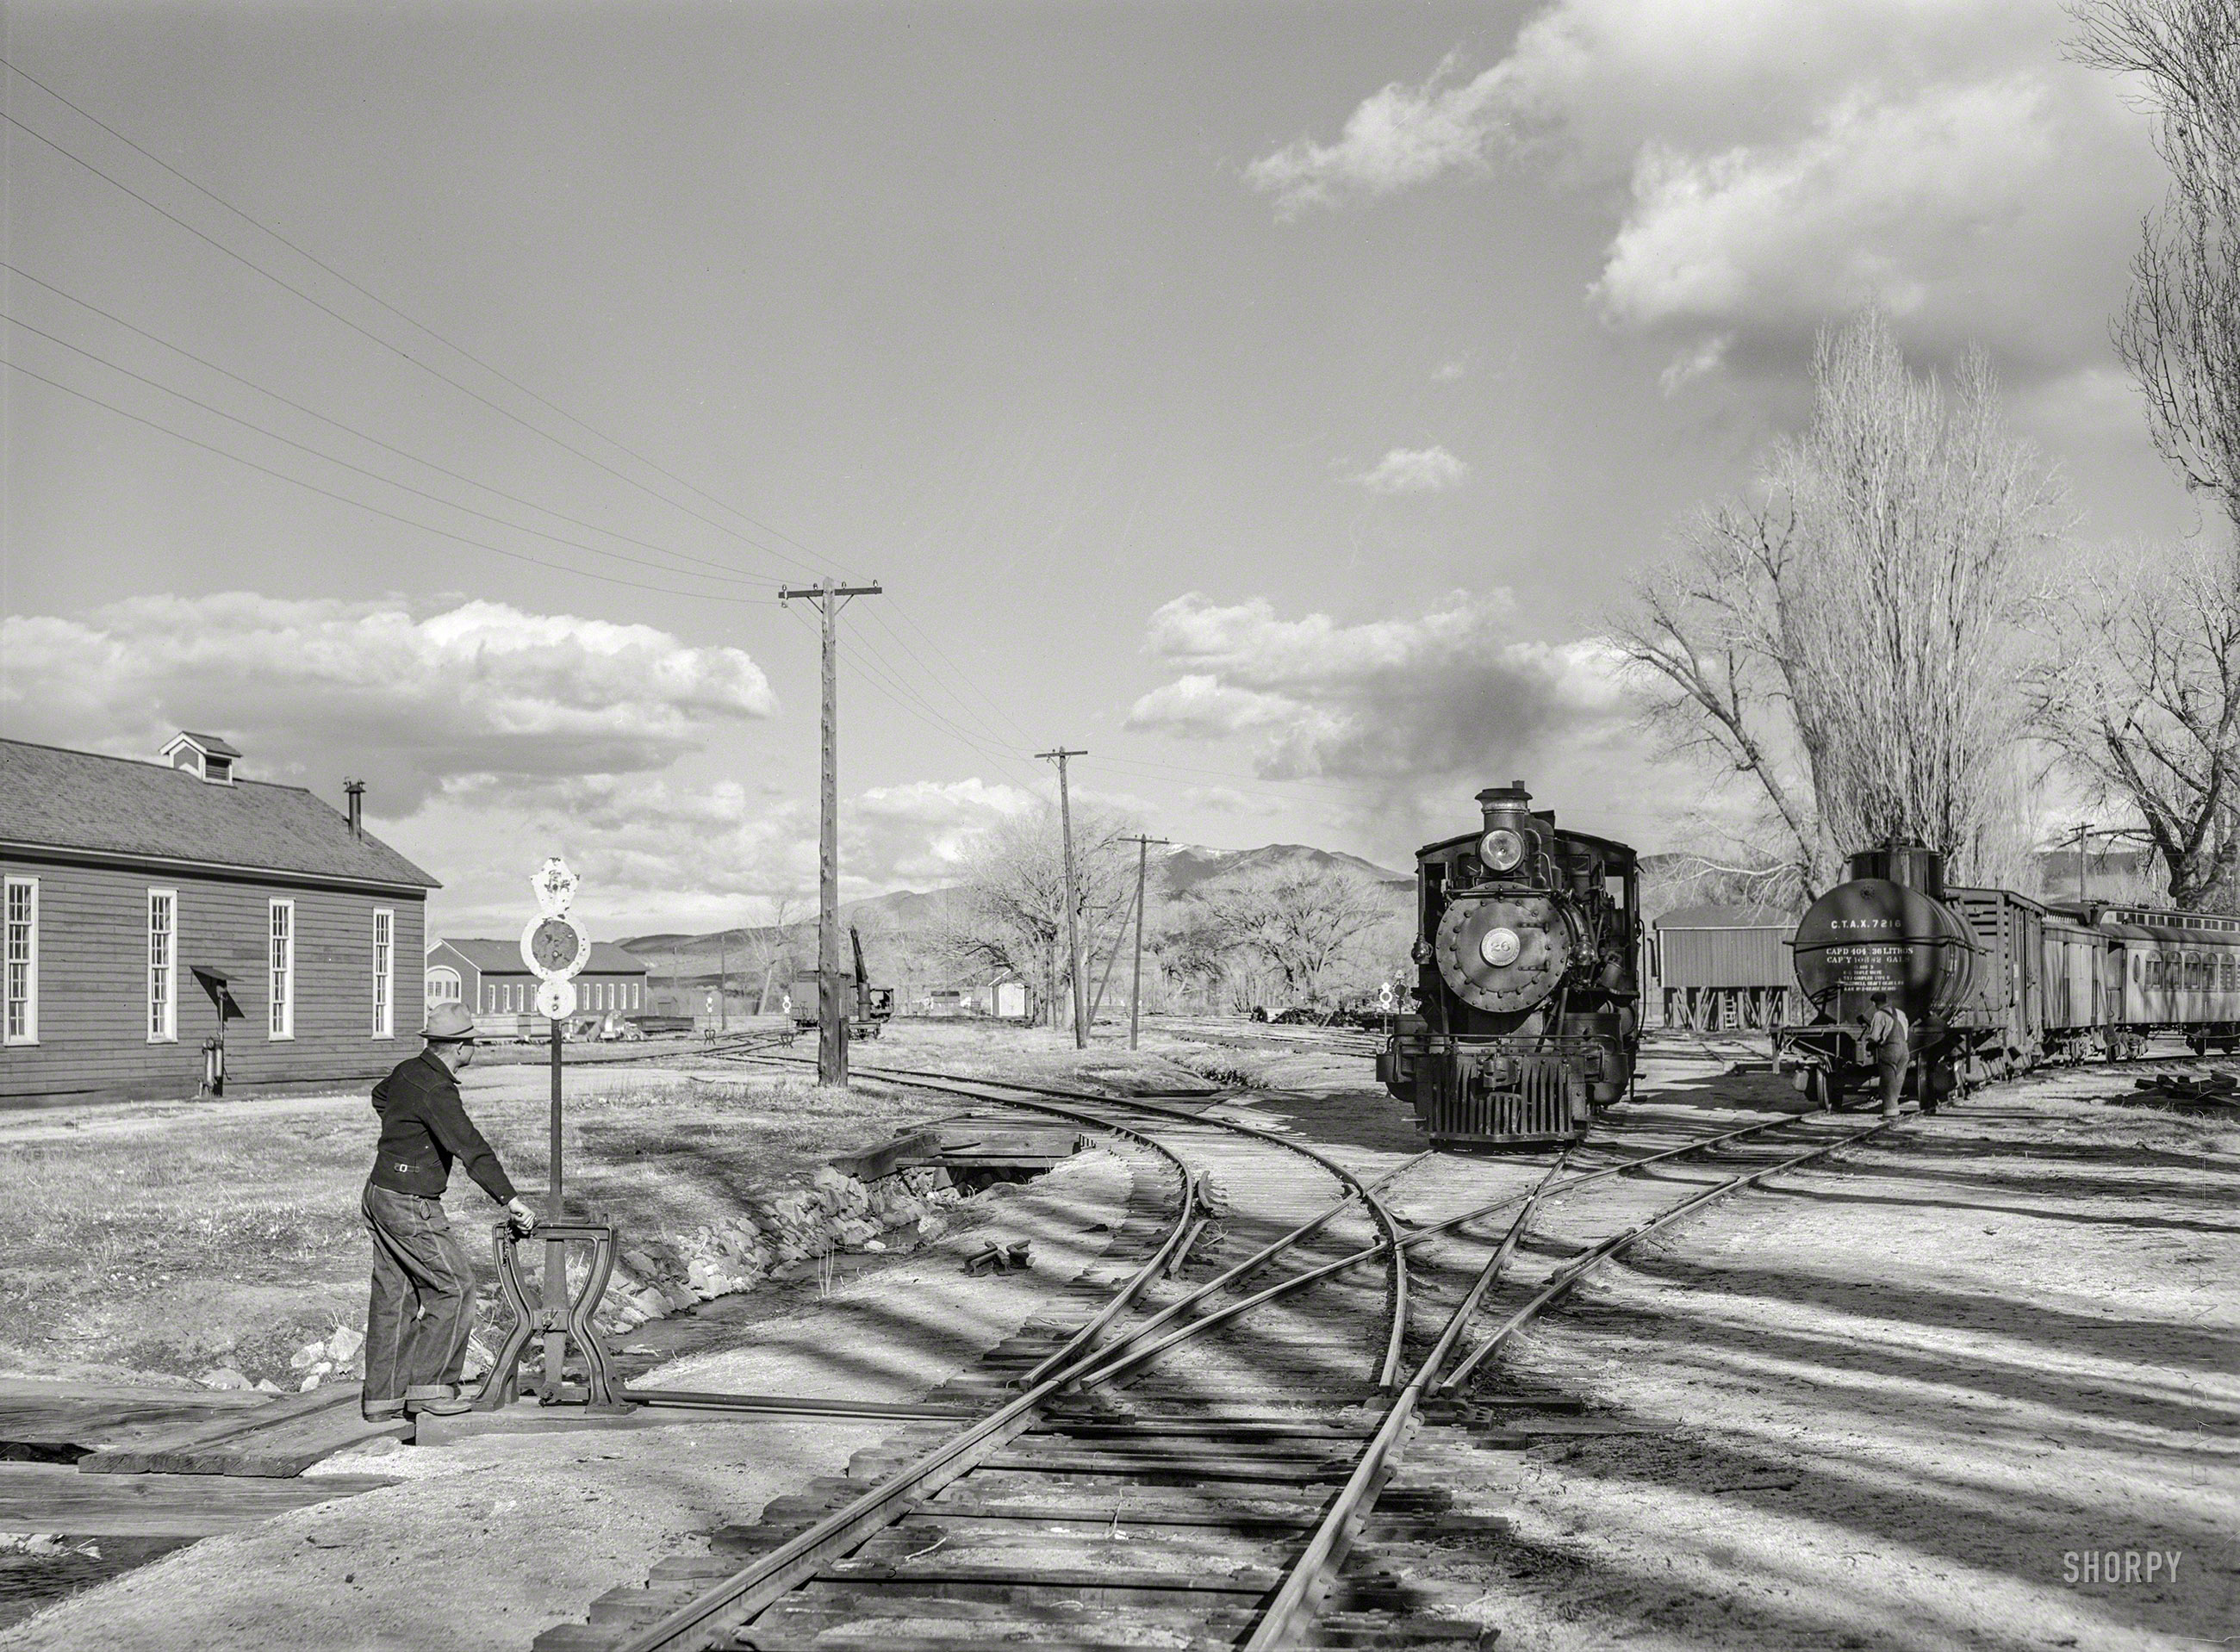 March 1940. "Operating switch at railroad station. Carson City, Nevada." Photo by Arthur Rothstein for the Farm Security Administration. View full size.